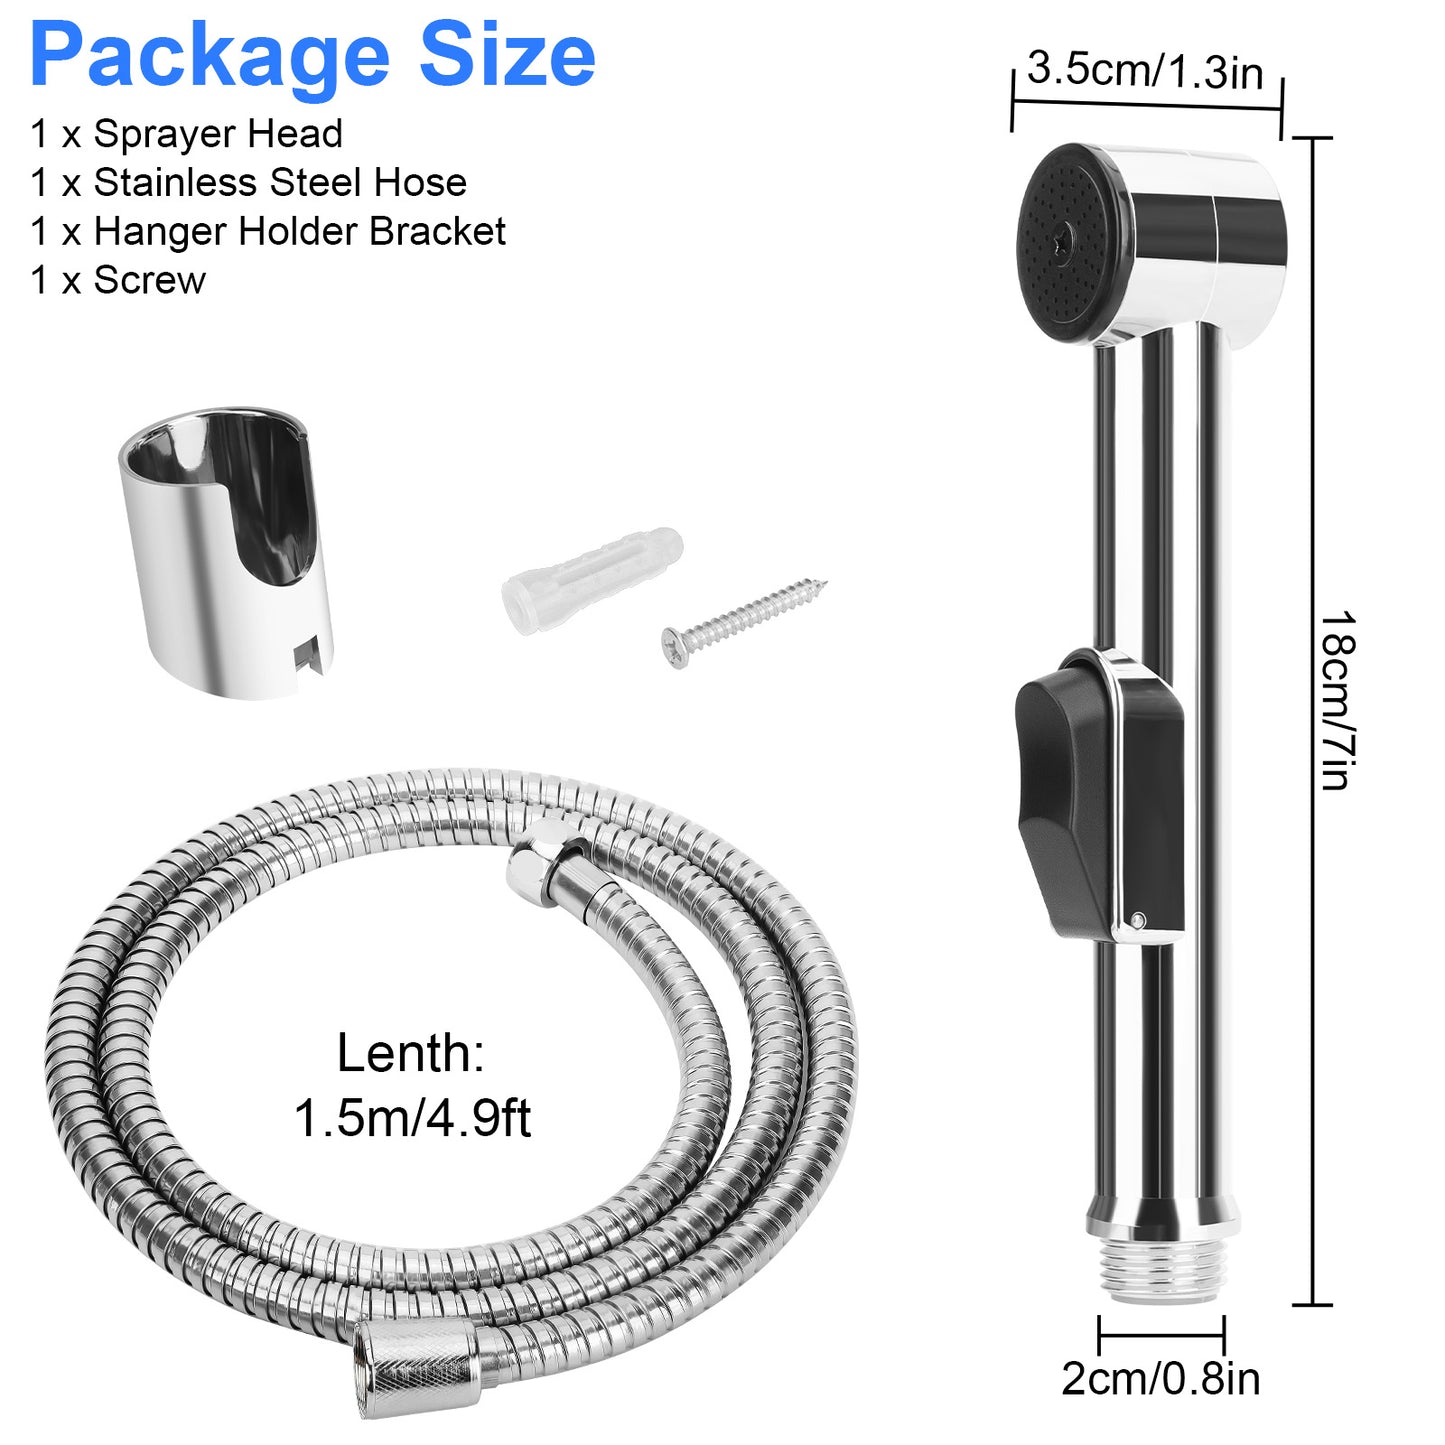 Handheld Bidet Toilet Sprayer Kit - Stainless Steel Hose and Wall Mount Options for Personal Hygiene, Bathroom Cleaning, Pet Care